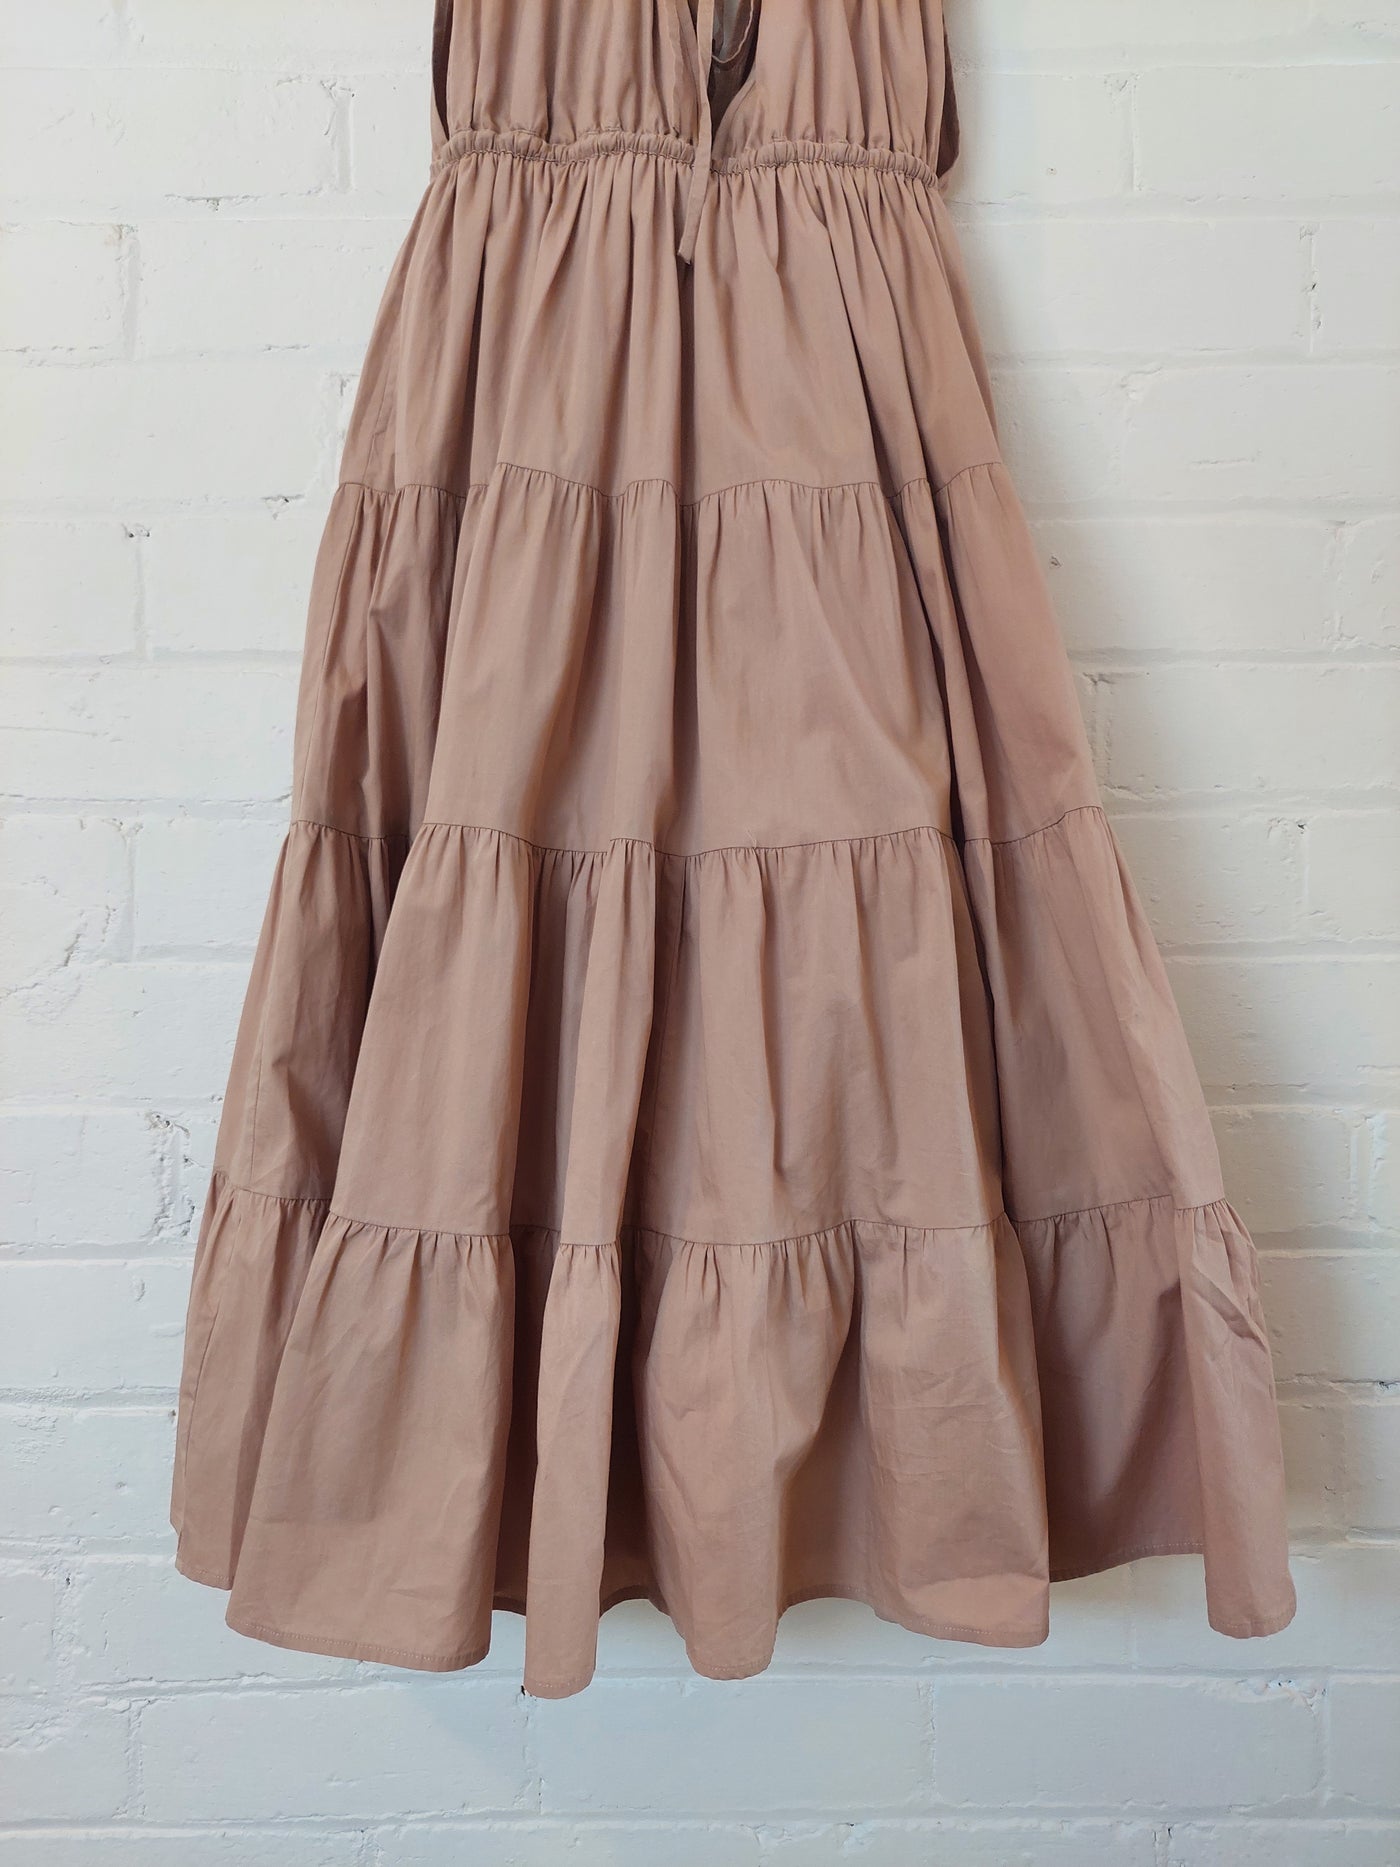 Palm Noosa Wish You Were Here Midi Dress in Classic Brown Hue, Size 8